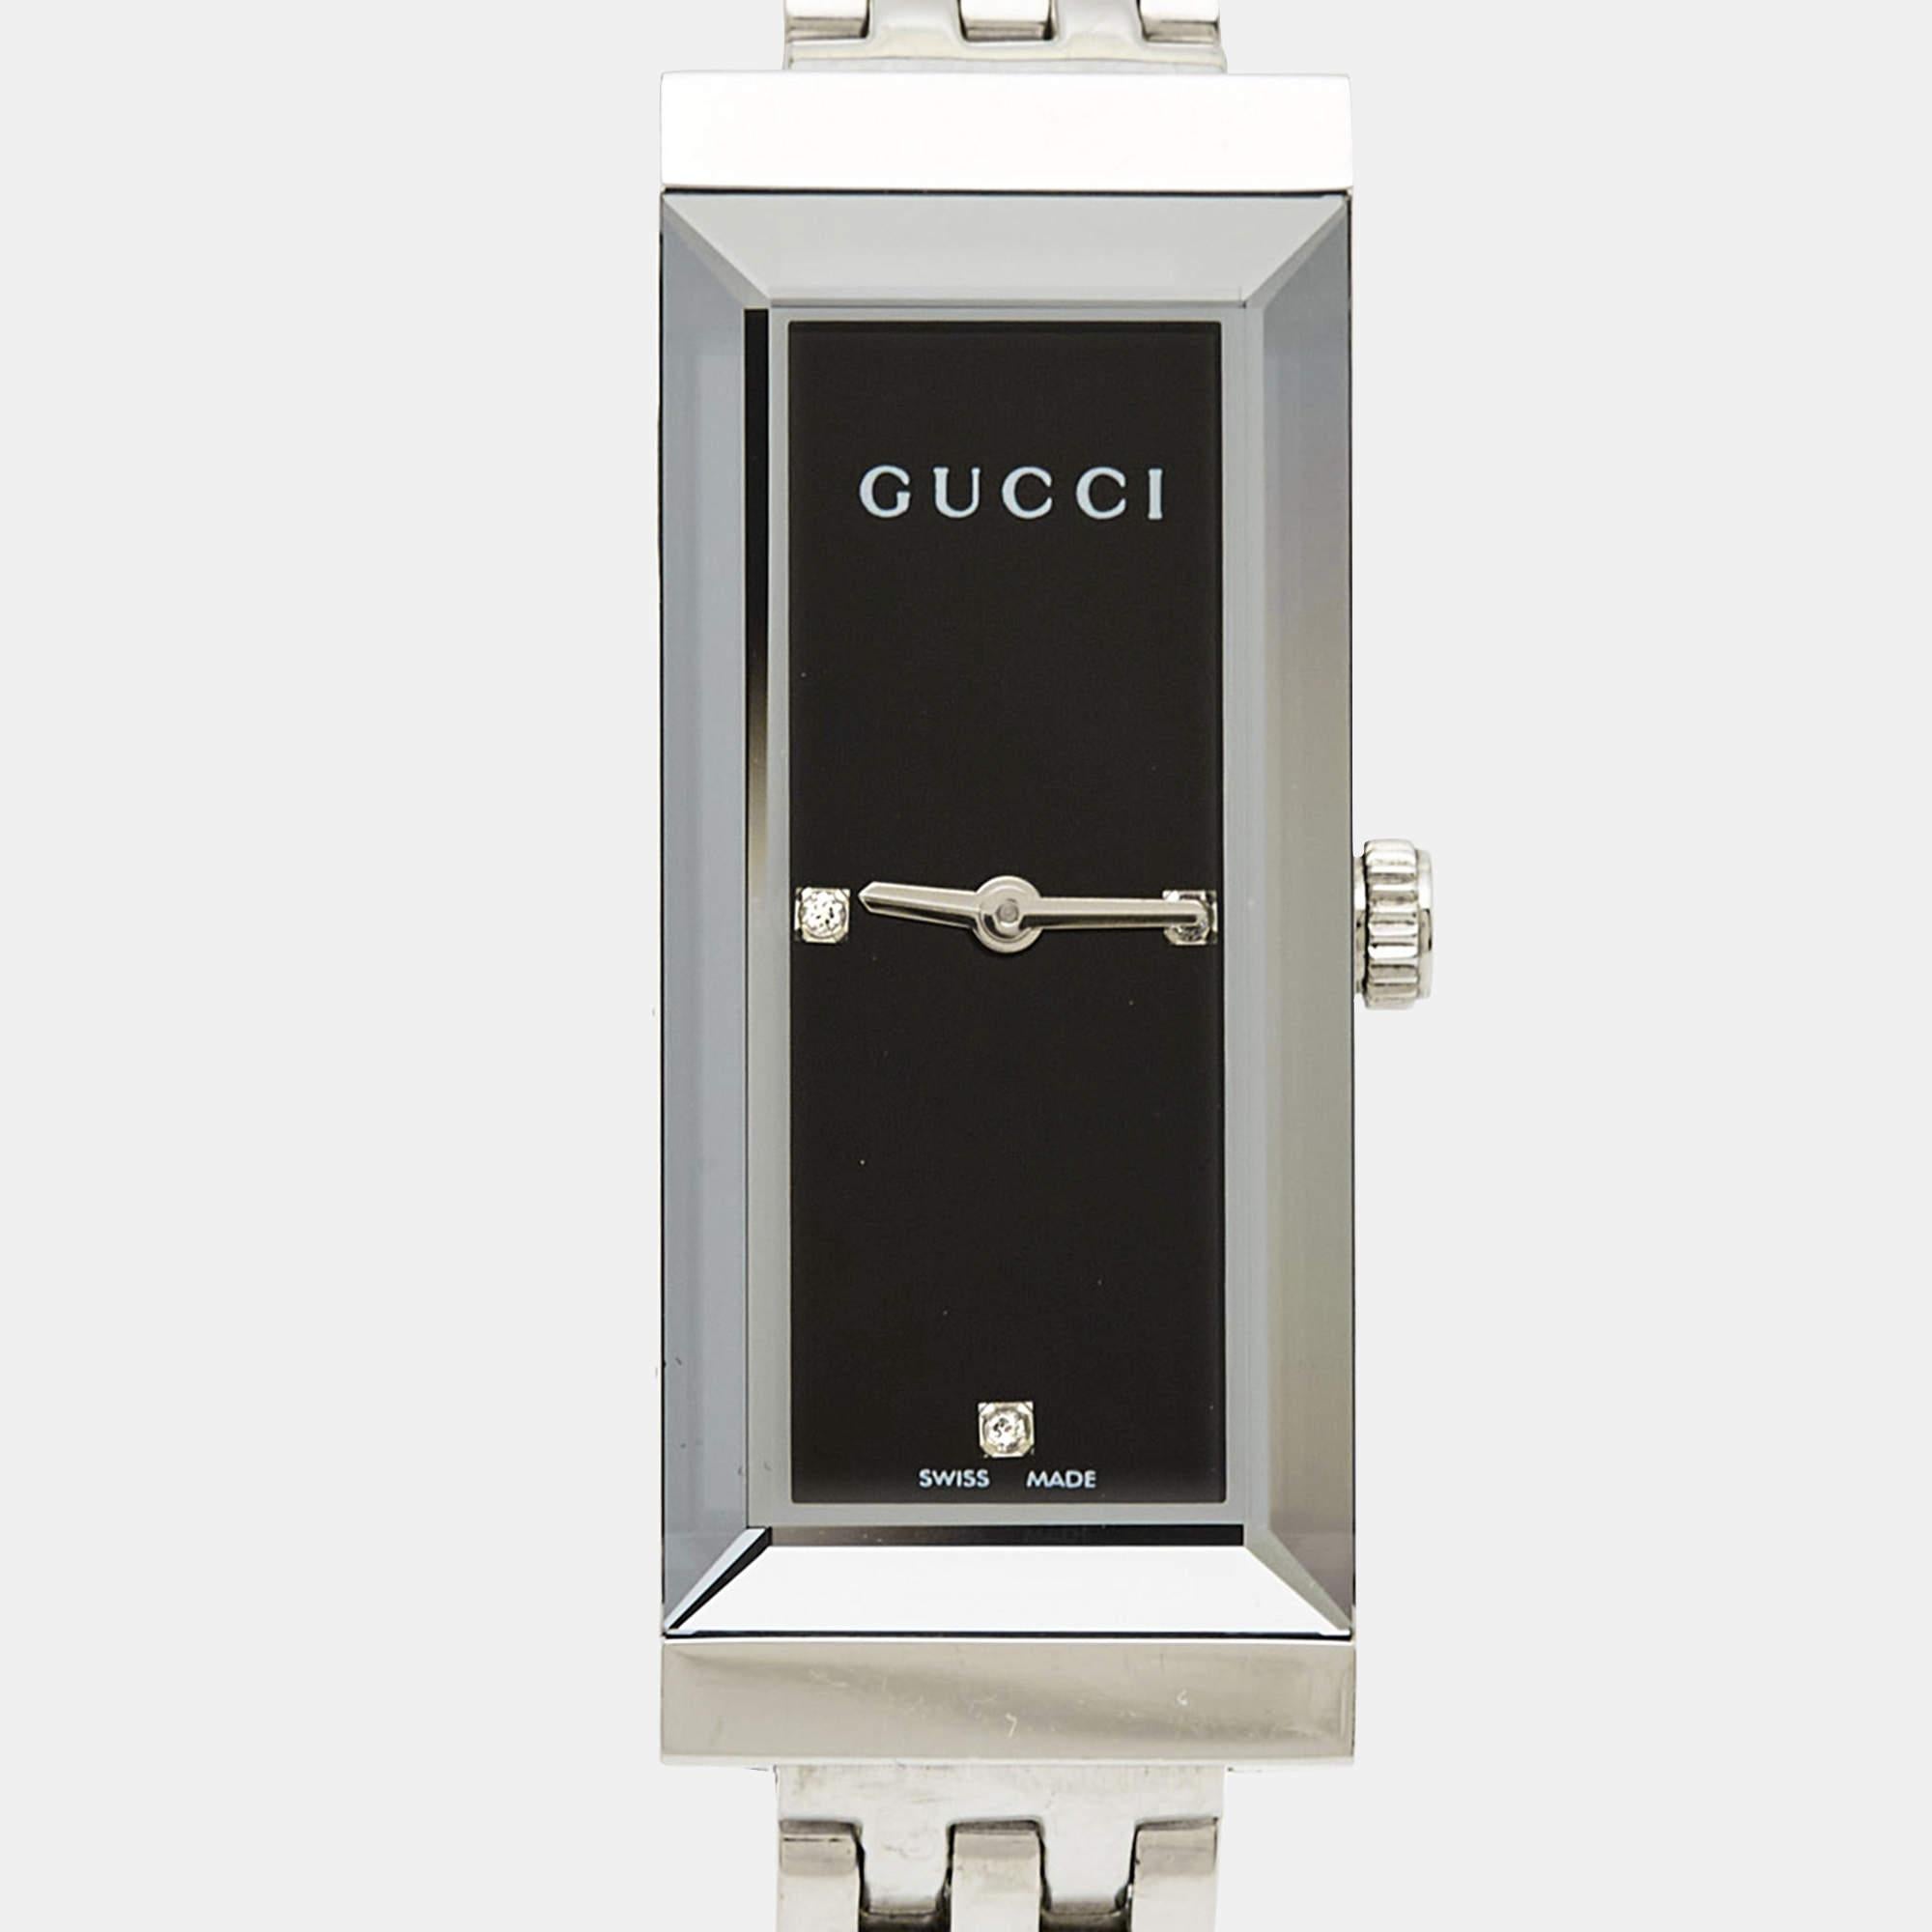 Let this fine designer wristwatch accompany you with ease and luxurious style. Beautifully crafted using the best quality materials, this authentic Gucci watch is built to be a standout accessory for your wrist.

